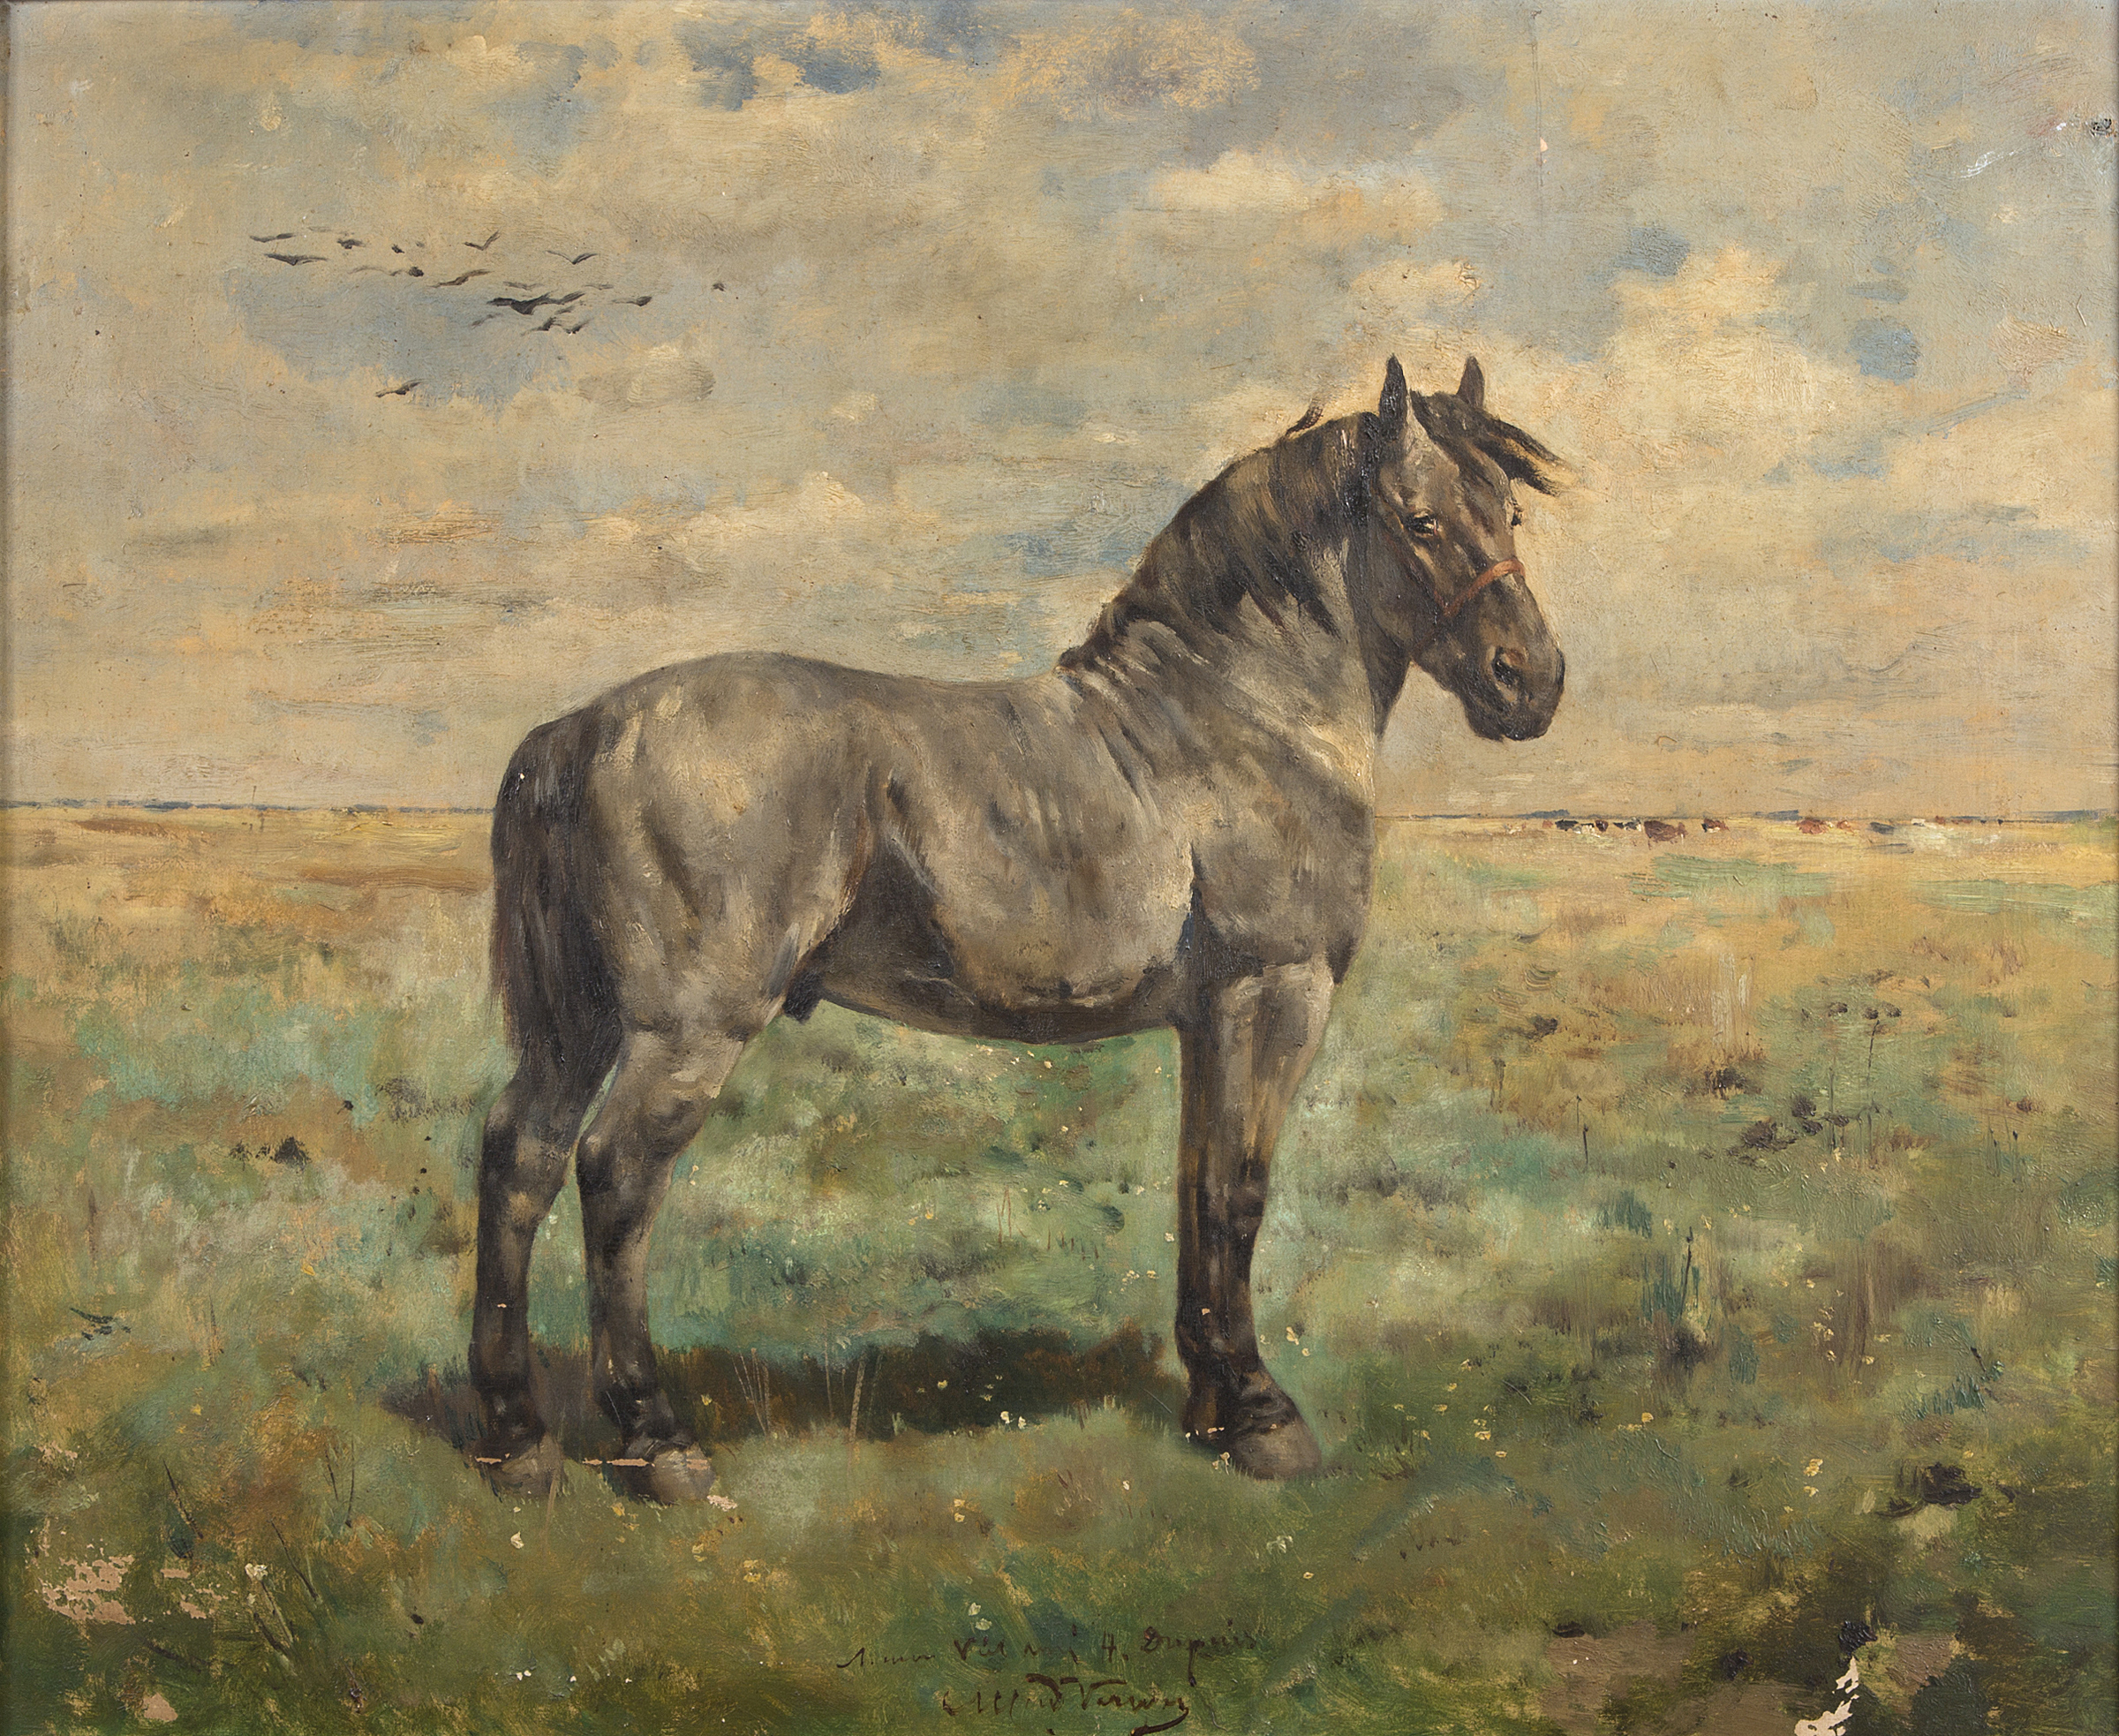 ALFRED JACQUES VERWEE (1838-1895)
Study of a Grey Pony in a Landscape with Cattle Beyond, O.O.C.